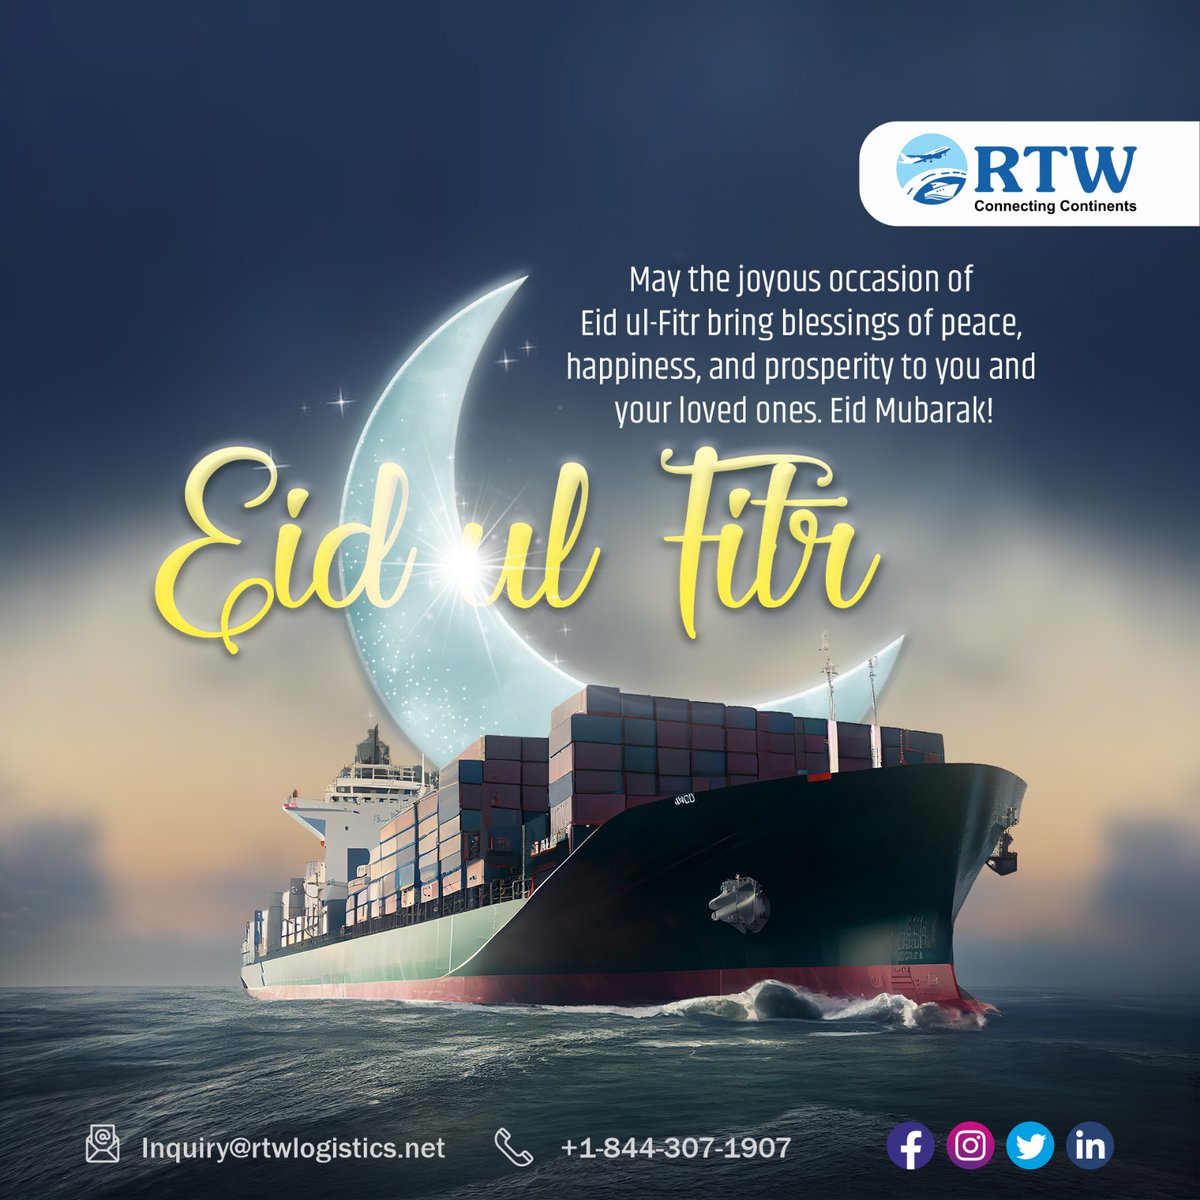 May the blessings of Eid Al-Fitr bring joy, peace, and prosperity to you and your loved ones. 

Wishing you a happy and blessed Eid filled with love and laughter!

#RTW #EidMubarak 🌙✨'